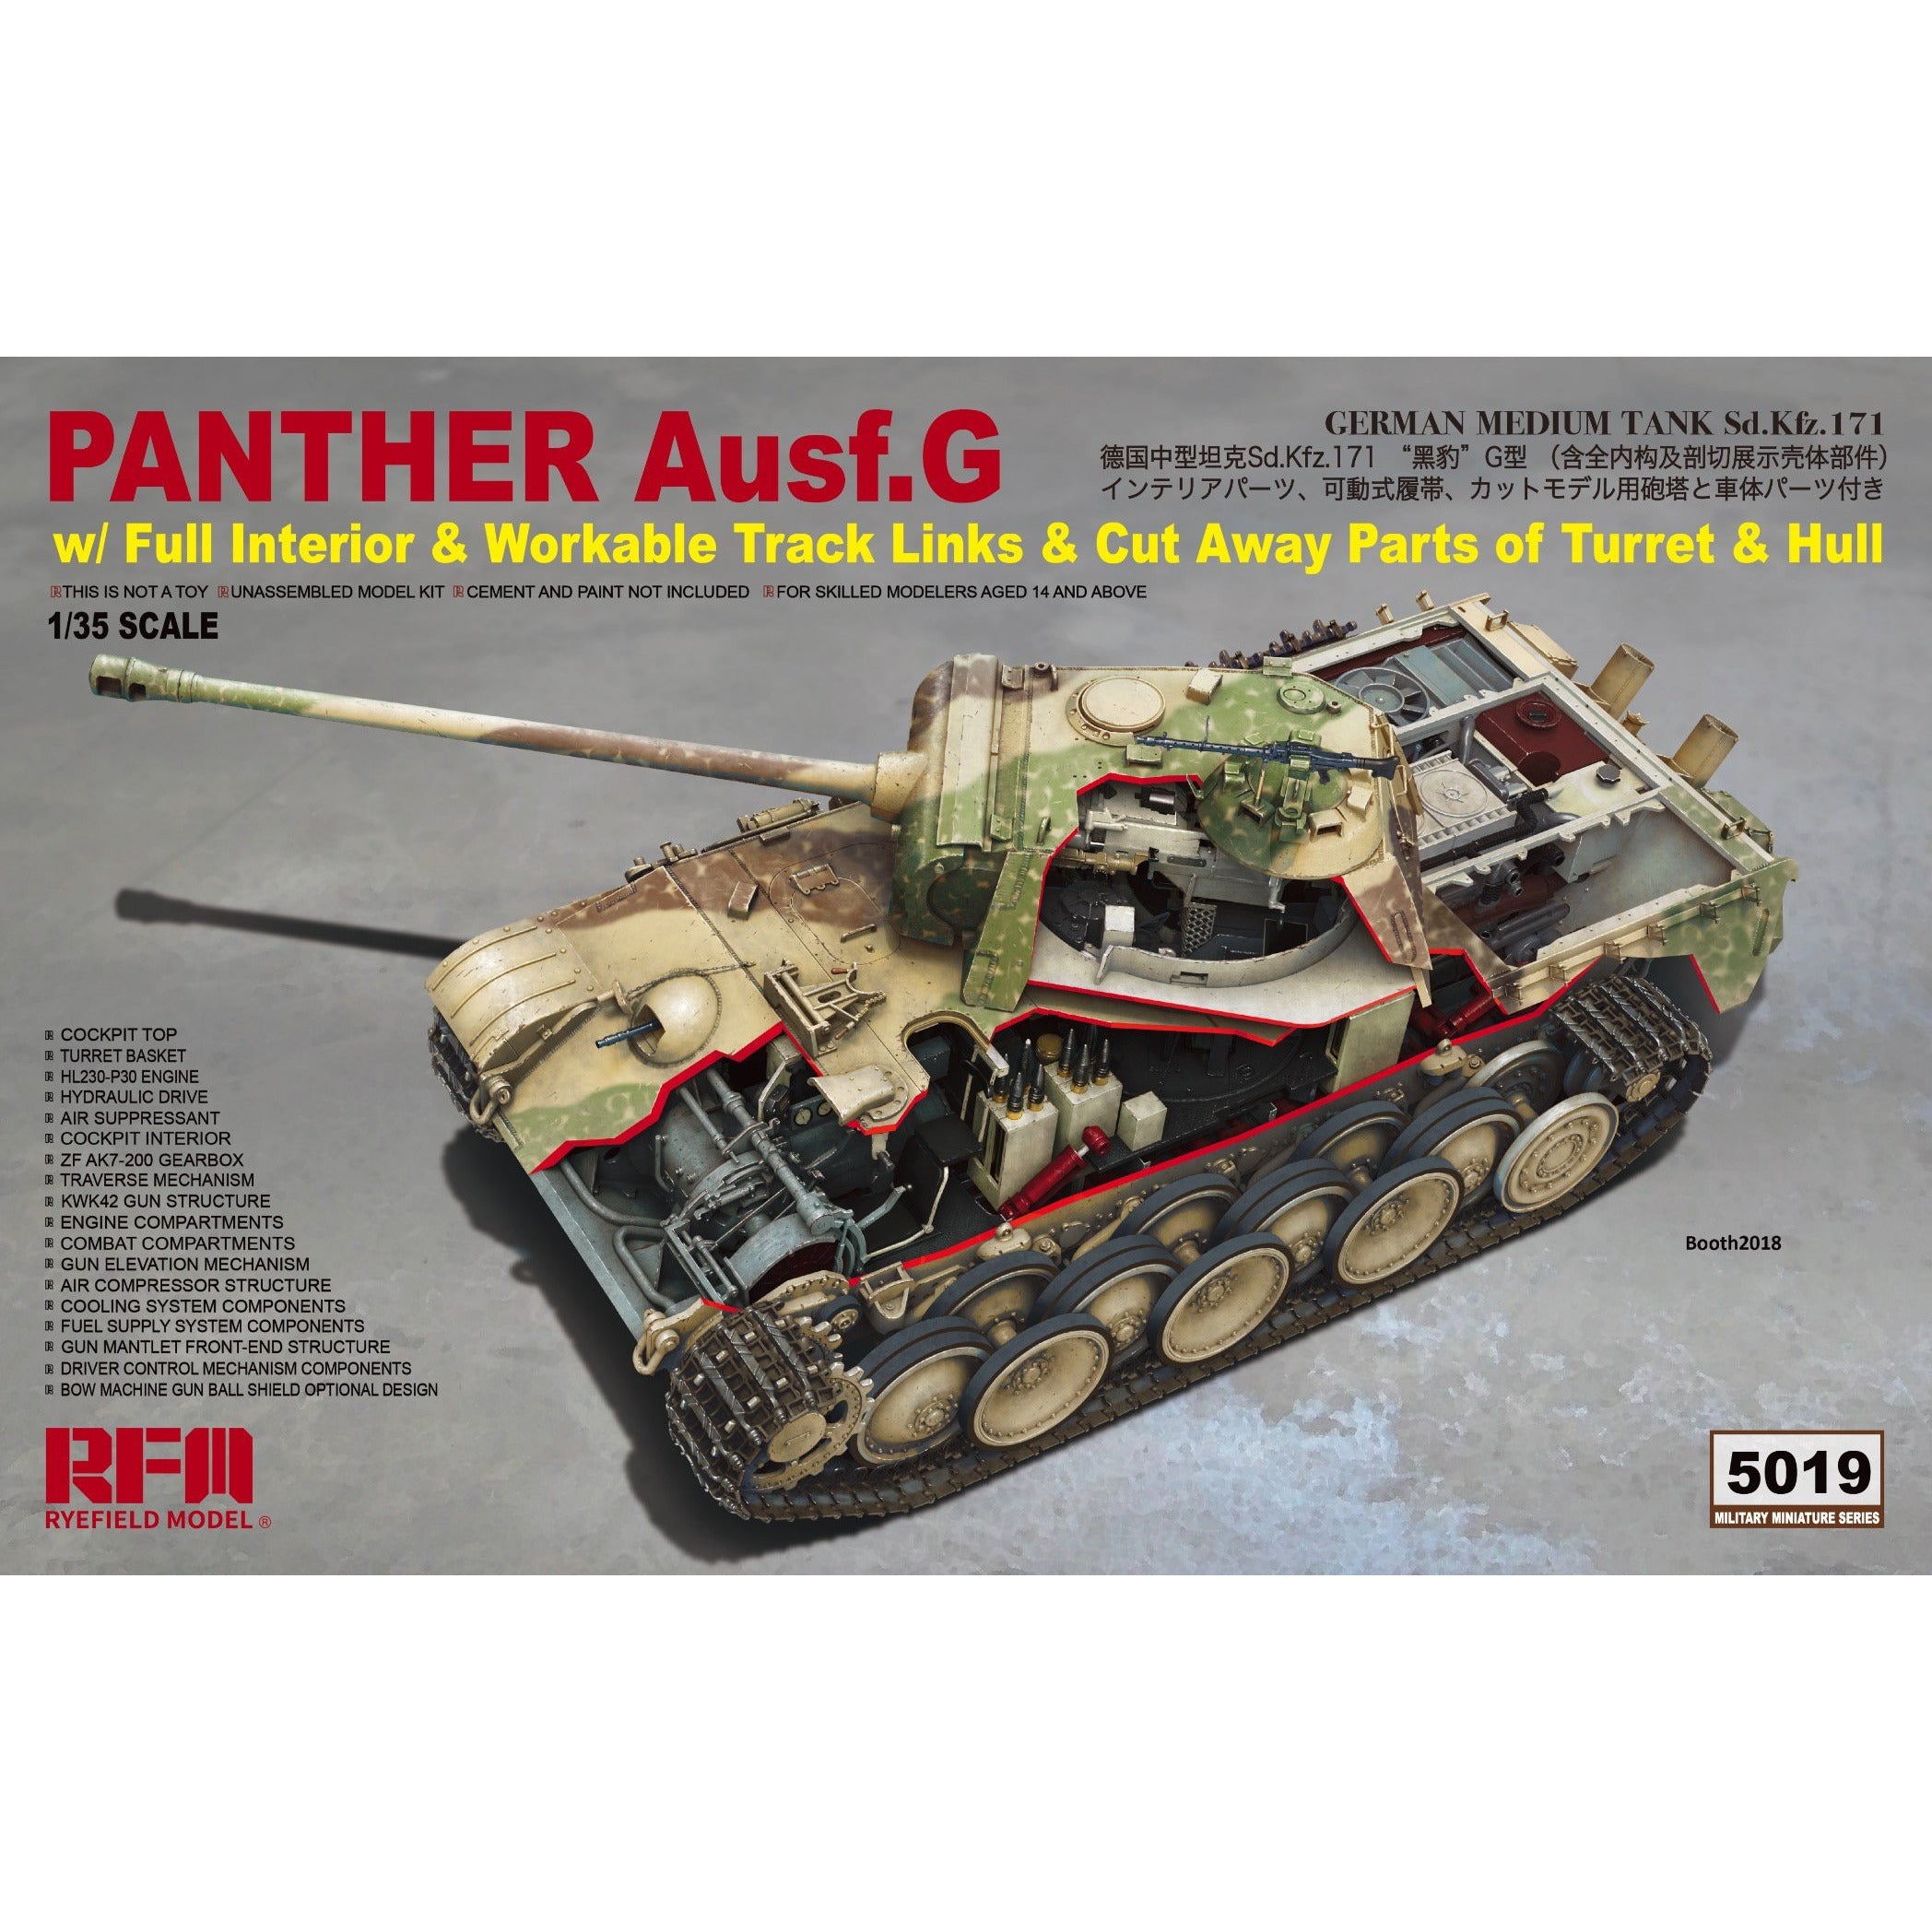 Panther Ausf. G w/Full Interior, Track Links, Cutaways 1/35 by Ryefield Model